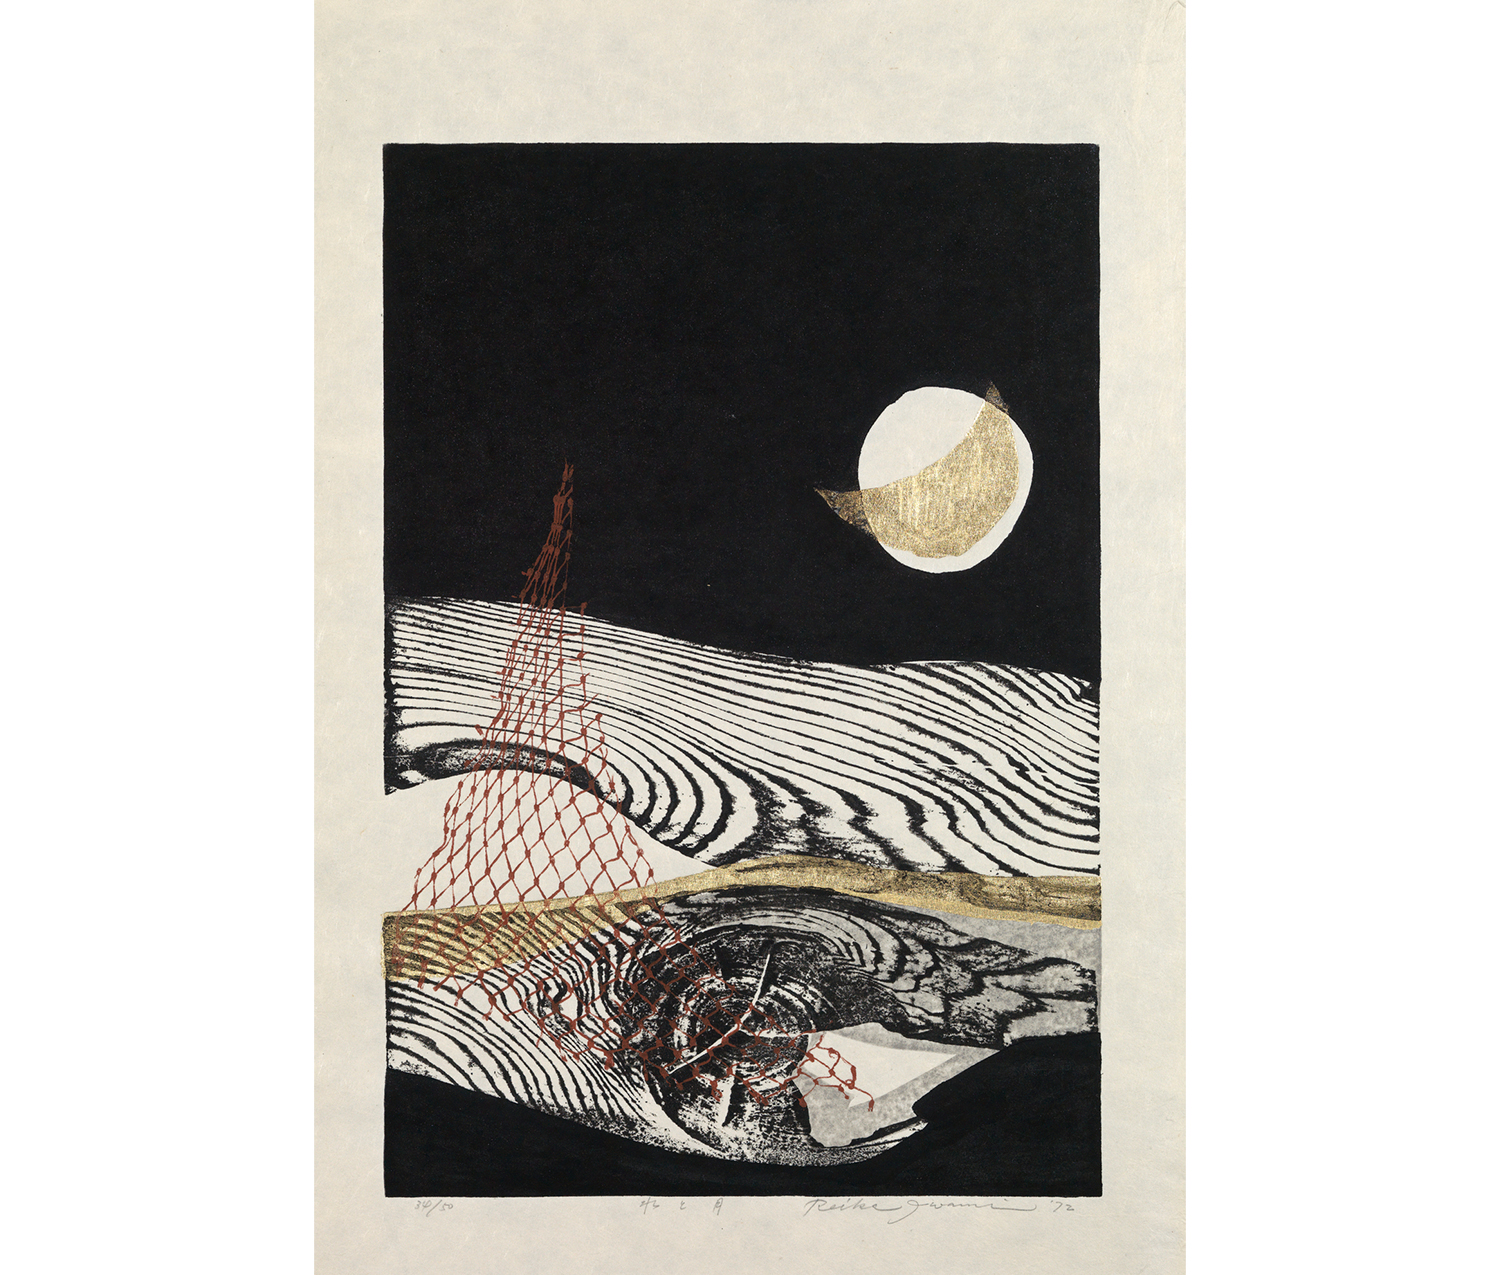 abstracted landscape, wood grain forming land or waves with red netting overlapping it on left and white orb pierced by gold crescent moon inside